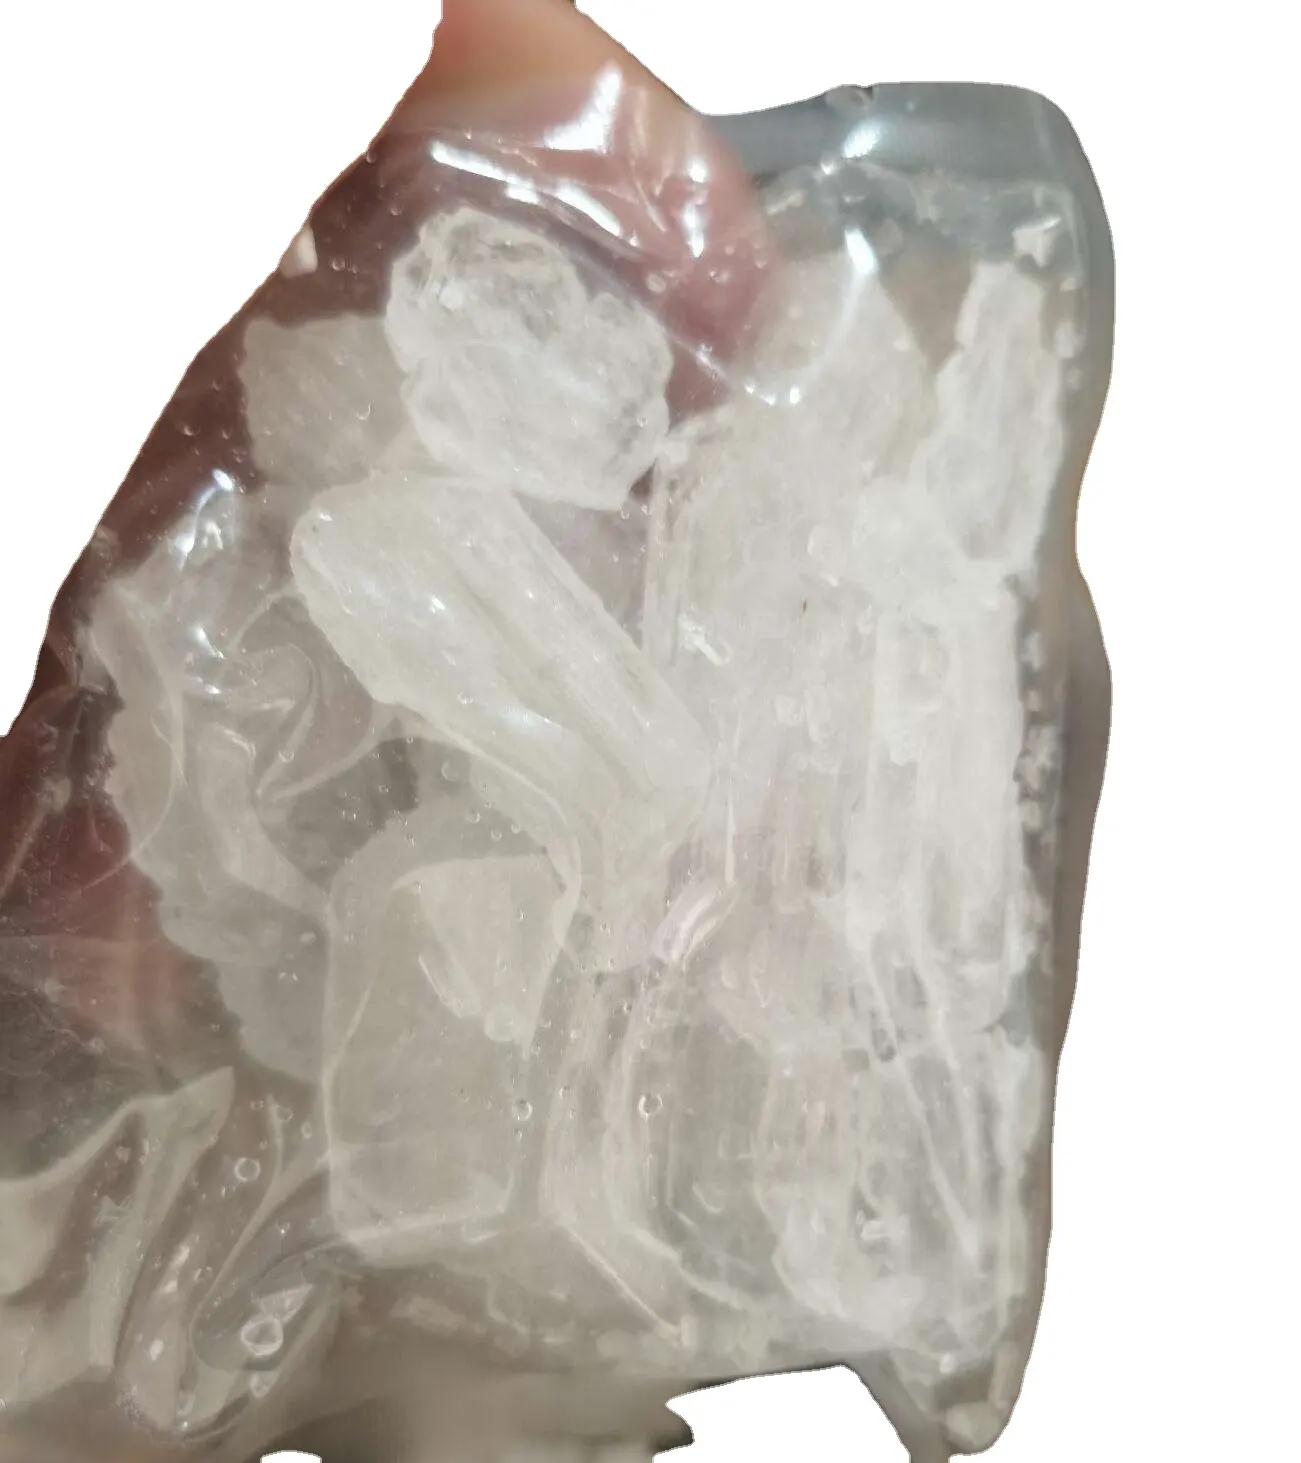 89-78-1 Free Sample hot sales high purity methly crystal cas 89-78-1 in stock